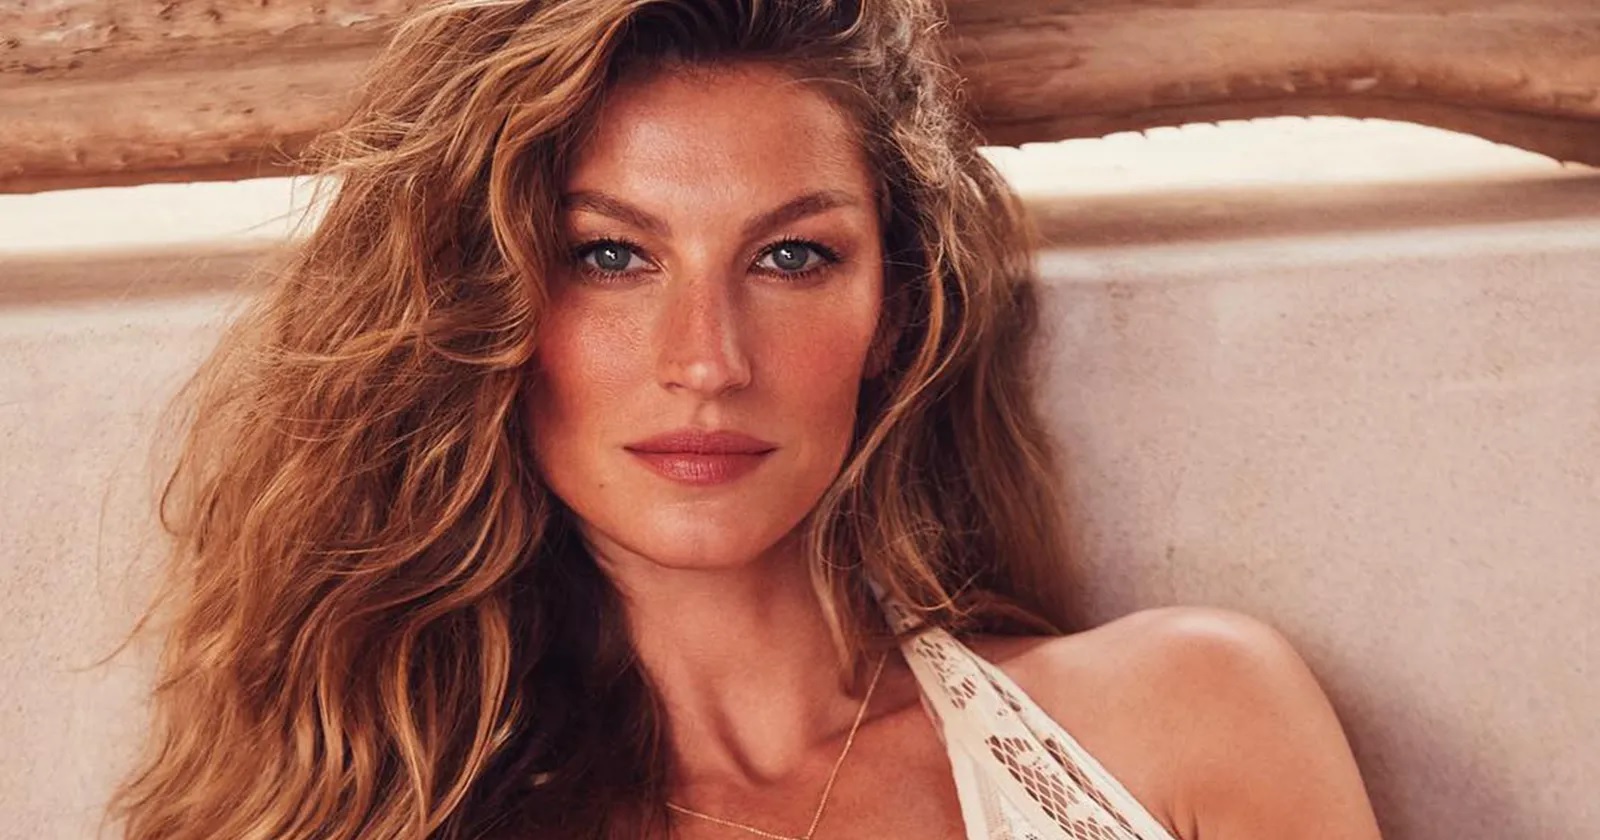 The Brazilian top-model Gisele Bündchen is the most influential celebrity on the internet today.